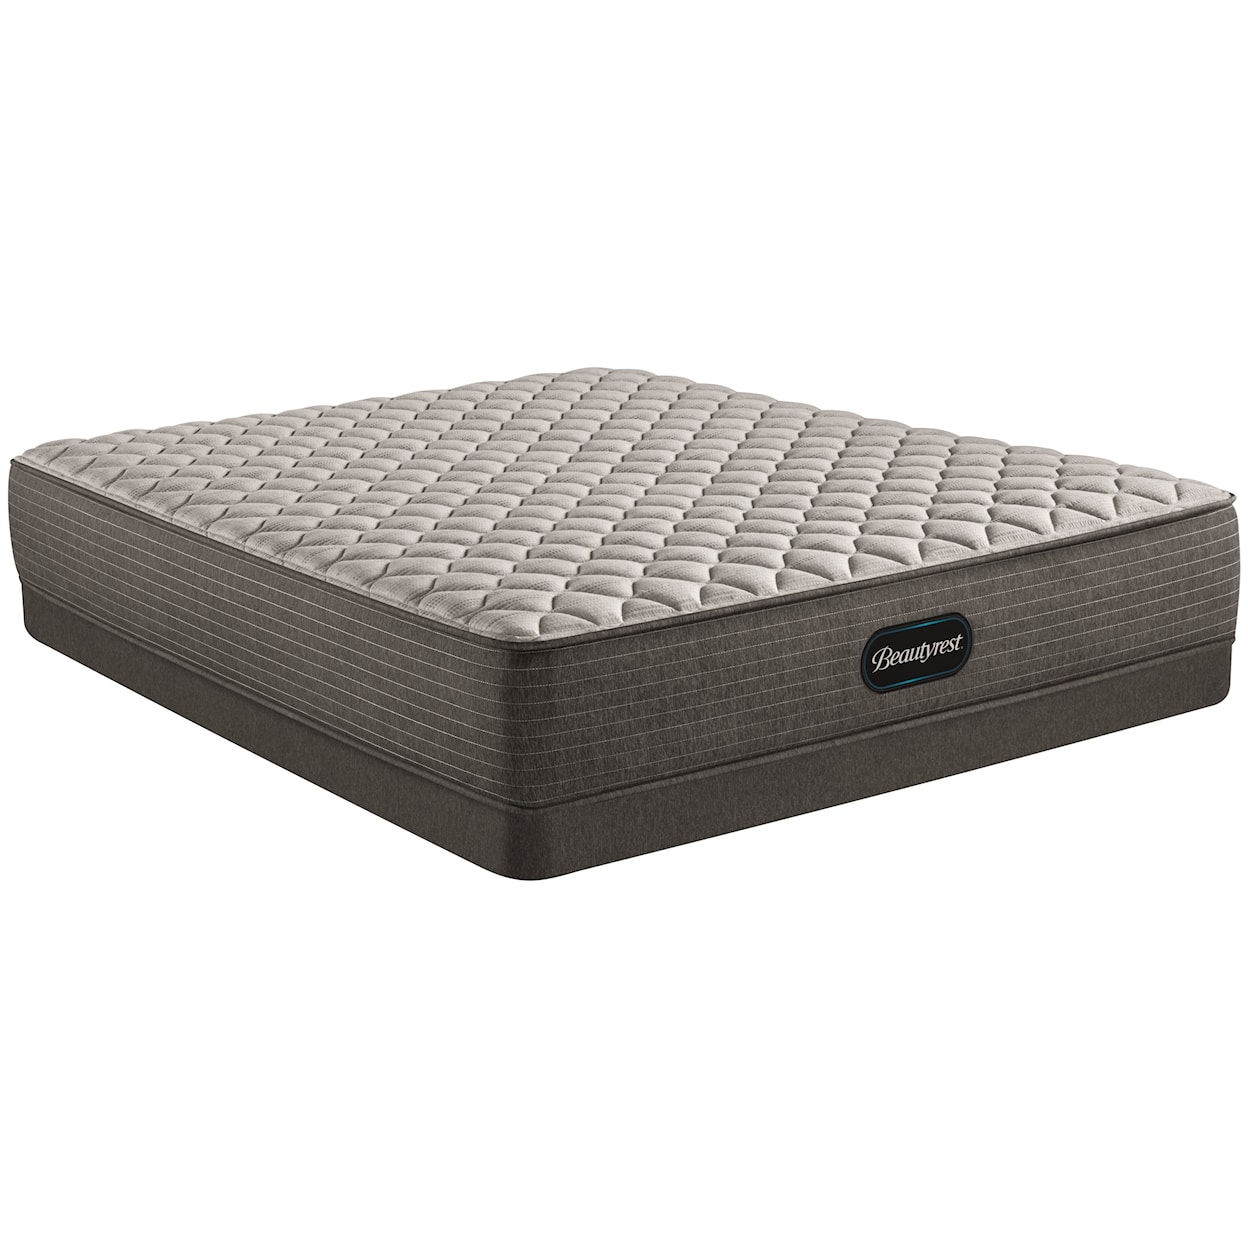 Beautyrest Select Firm Twin Firm Mattress and 5" Foundation